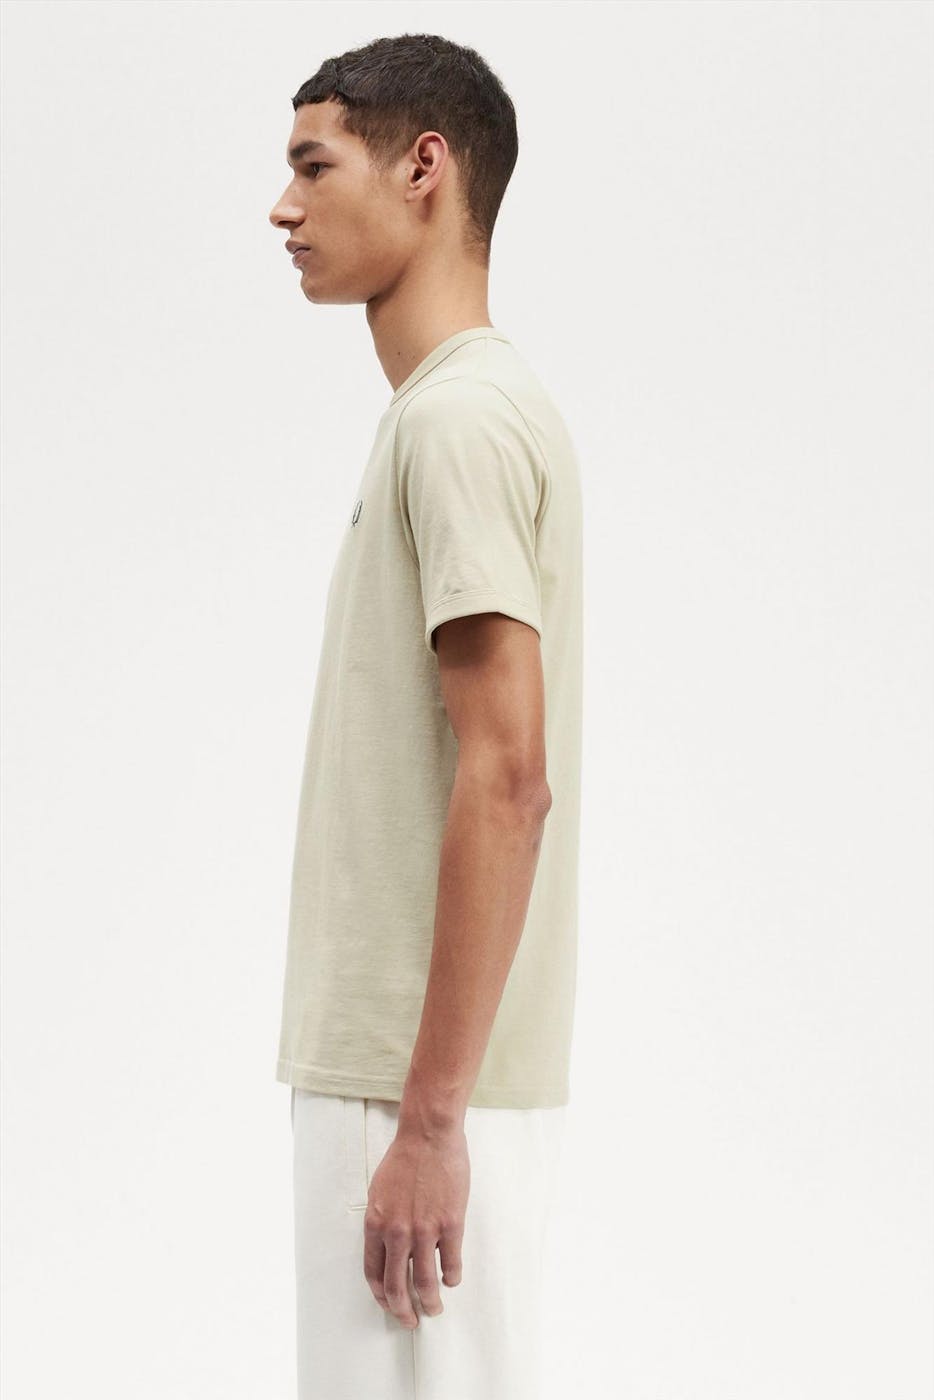 Fred Perry - Beige Ringer T-shirt